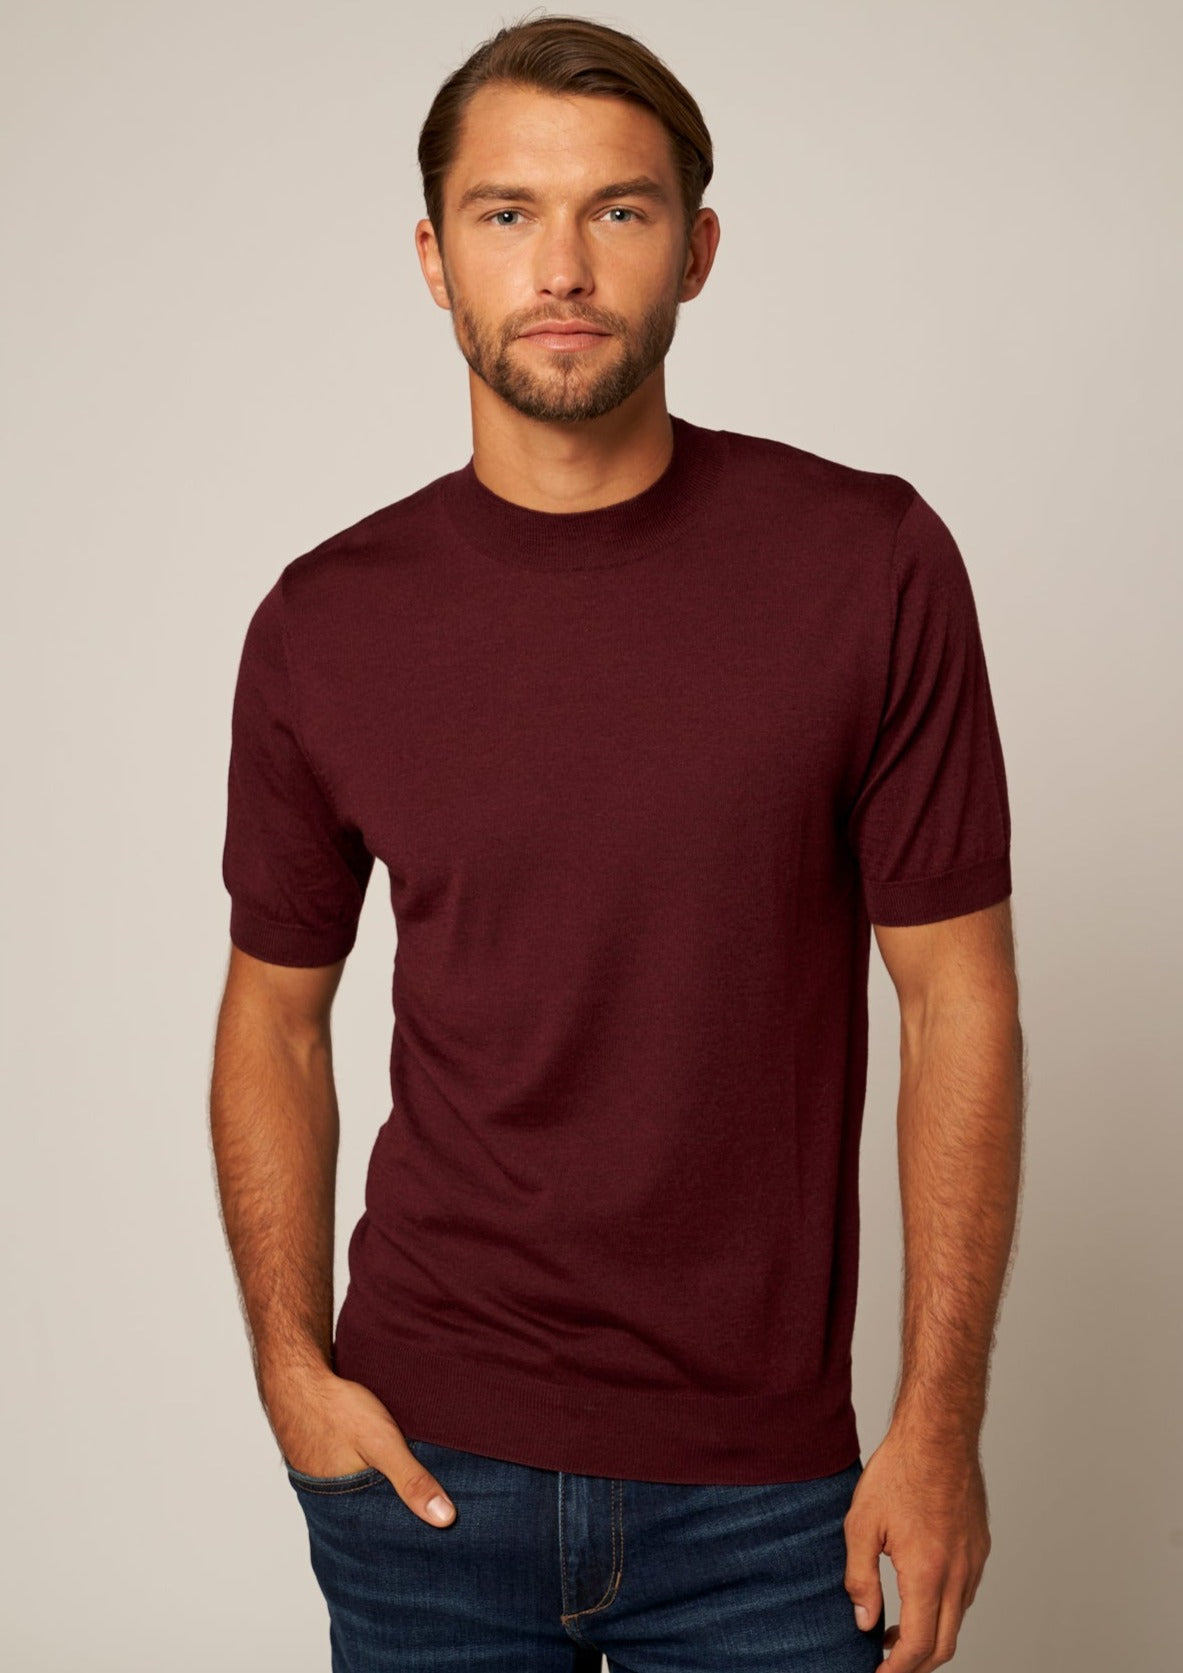 Silk Cashmere High Neck Short Sleeve Tee | Bellemere New York | 100% Cashmere Sustainable